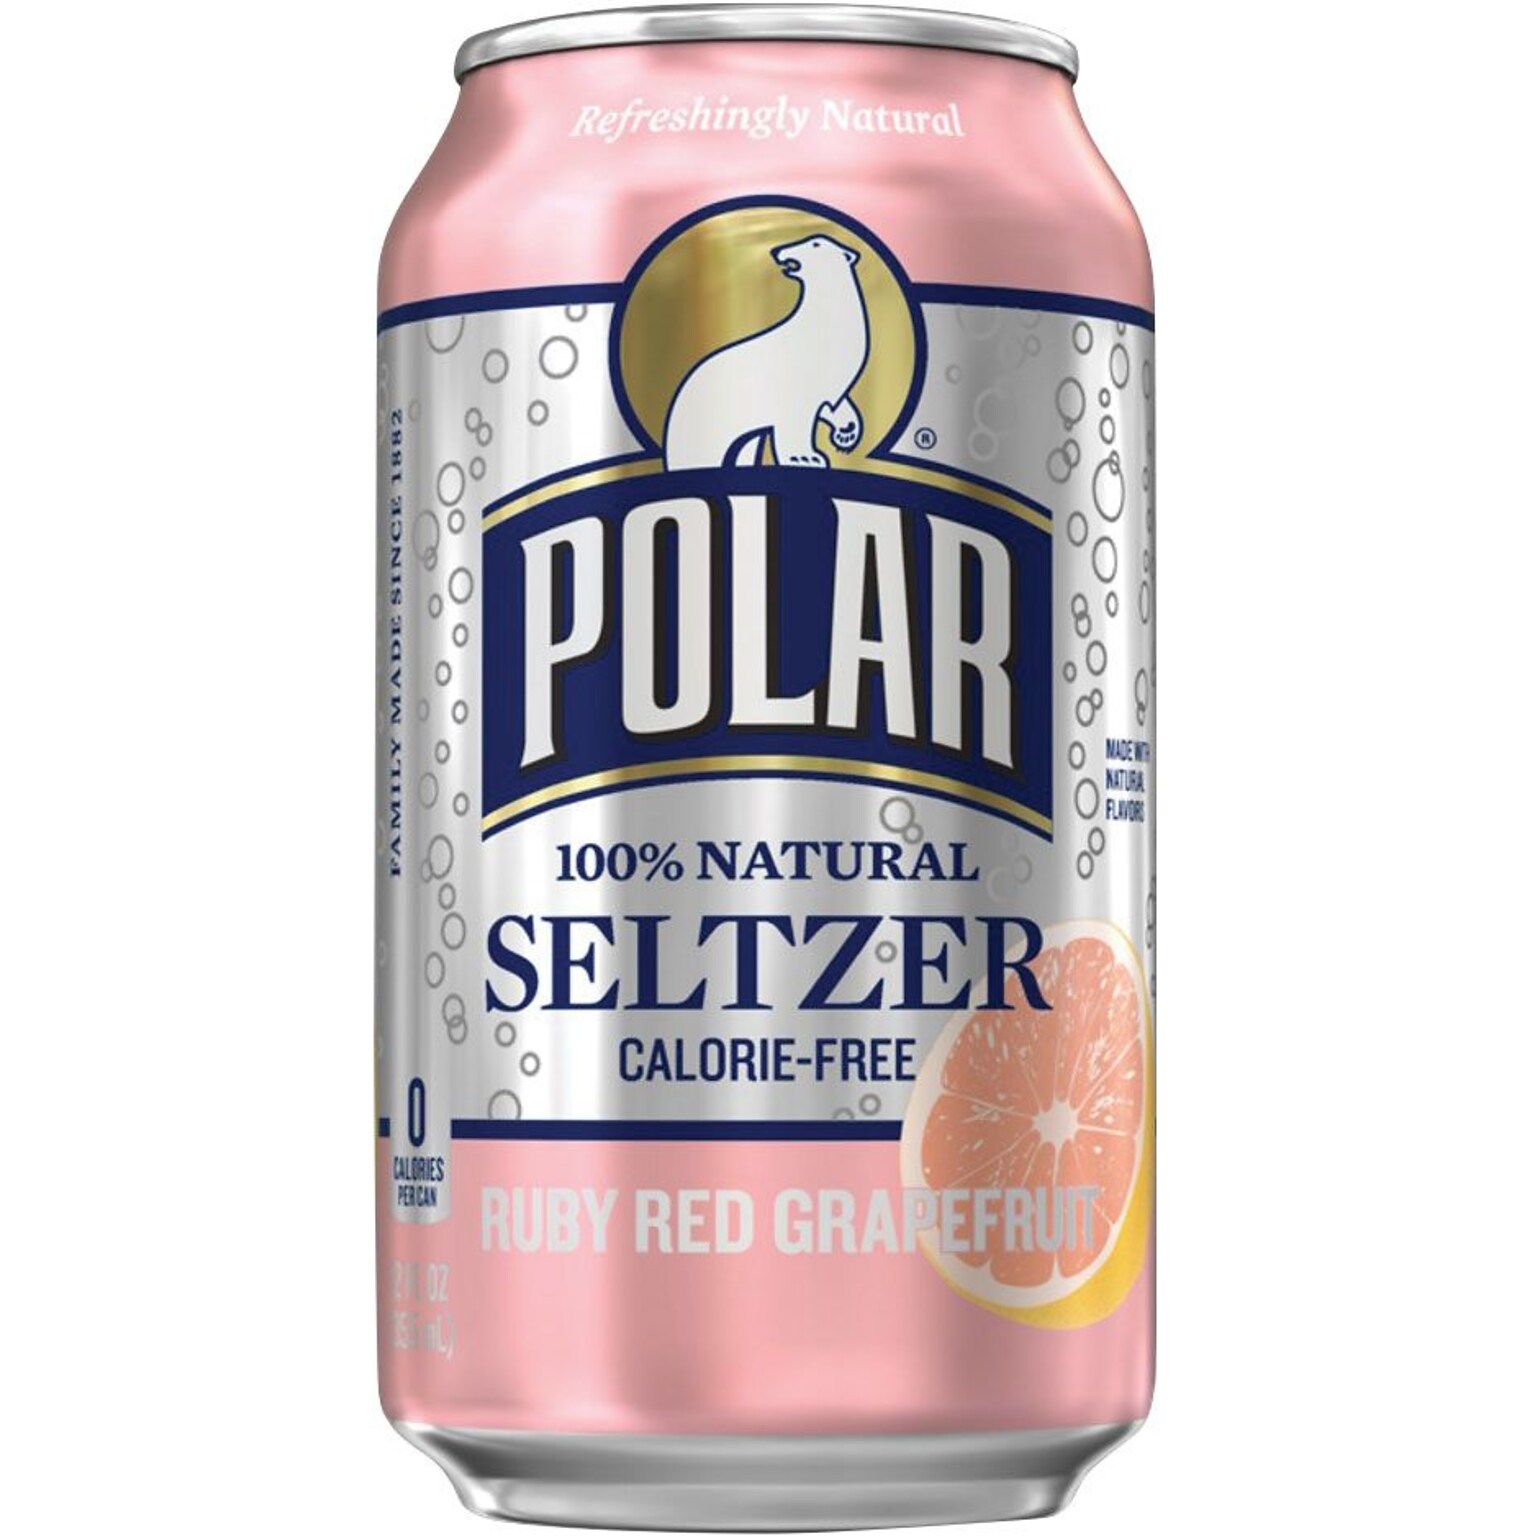 Polar® Ruby Red Grapefruit Seltzer, 12 oz. cans, 24 cans